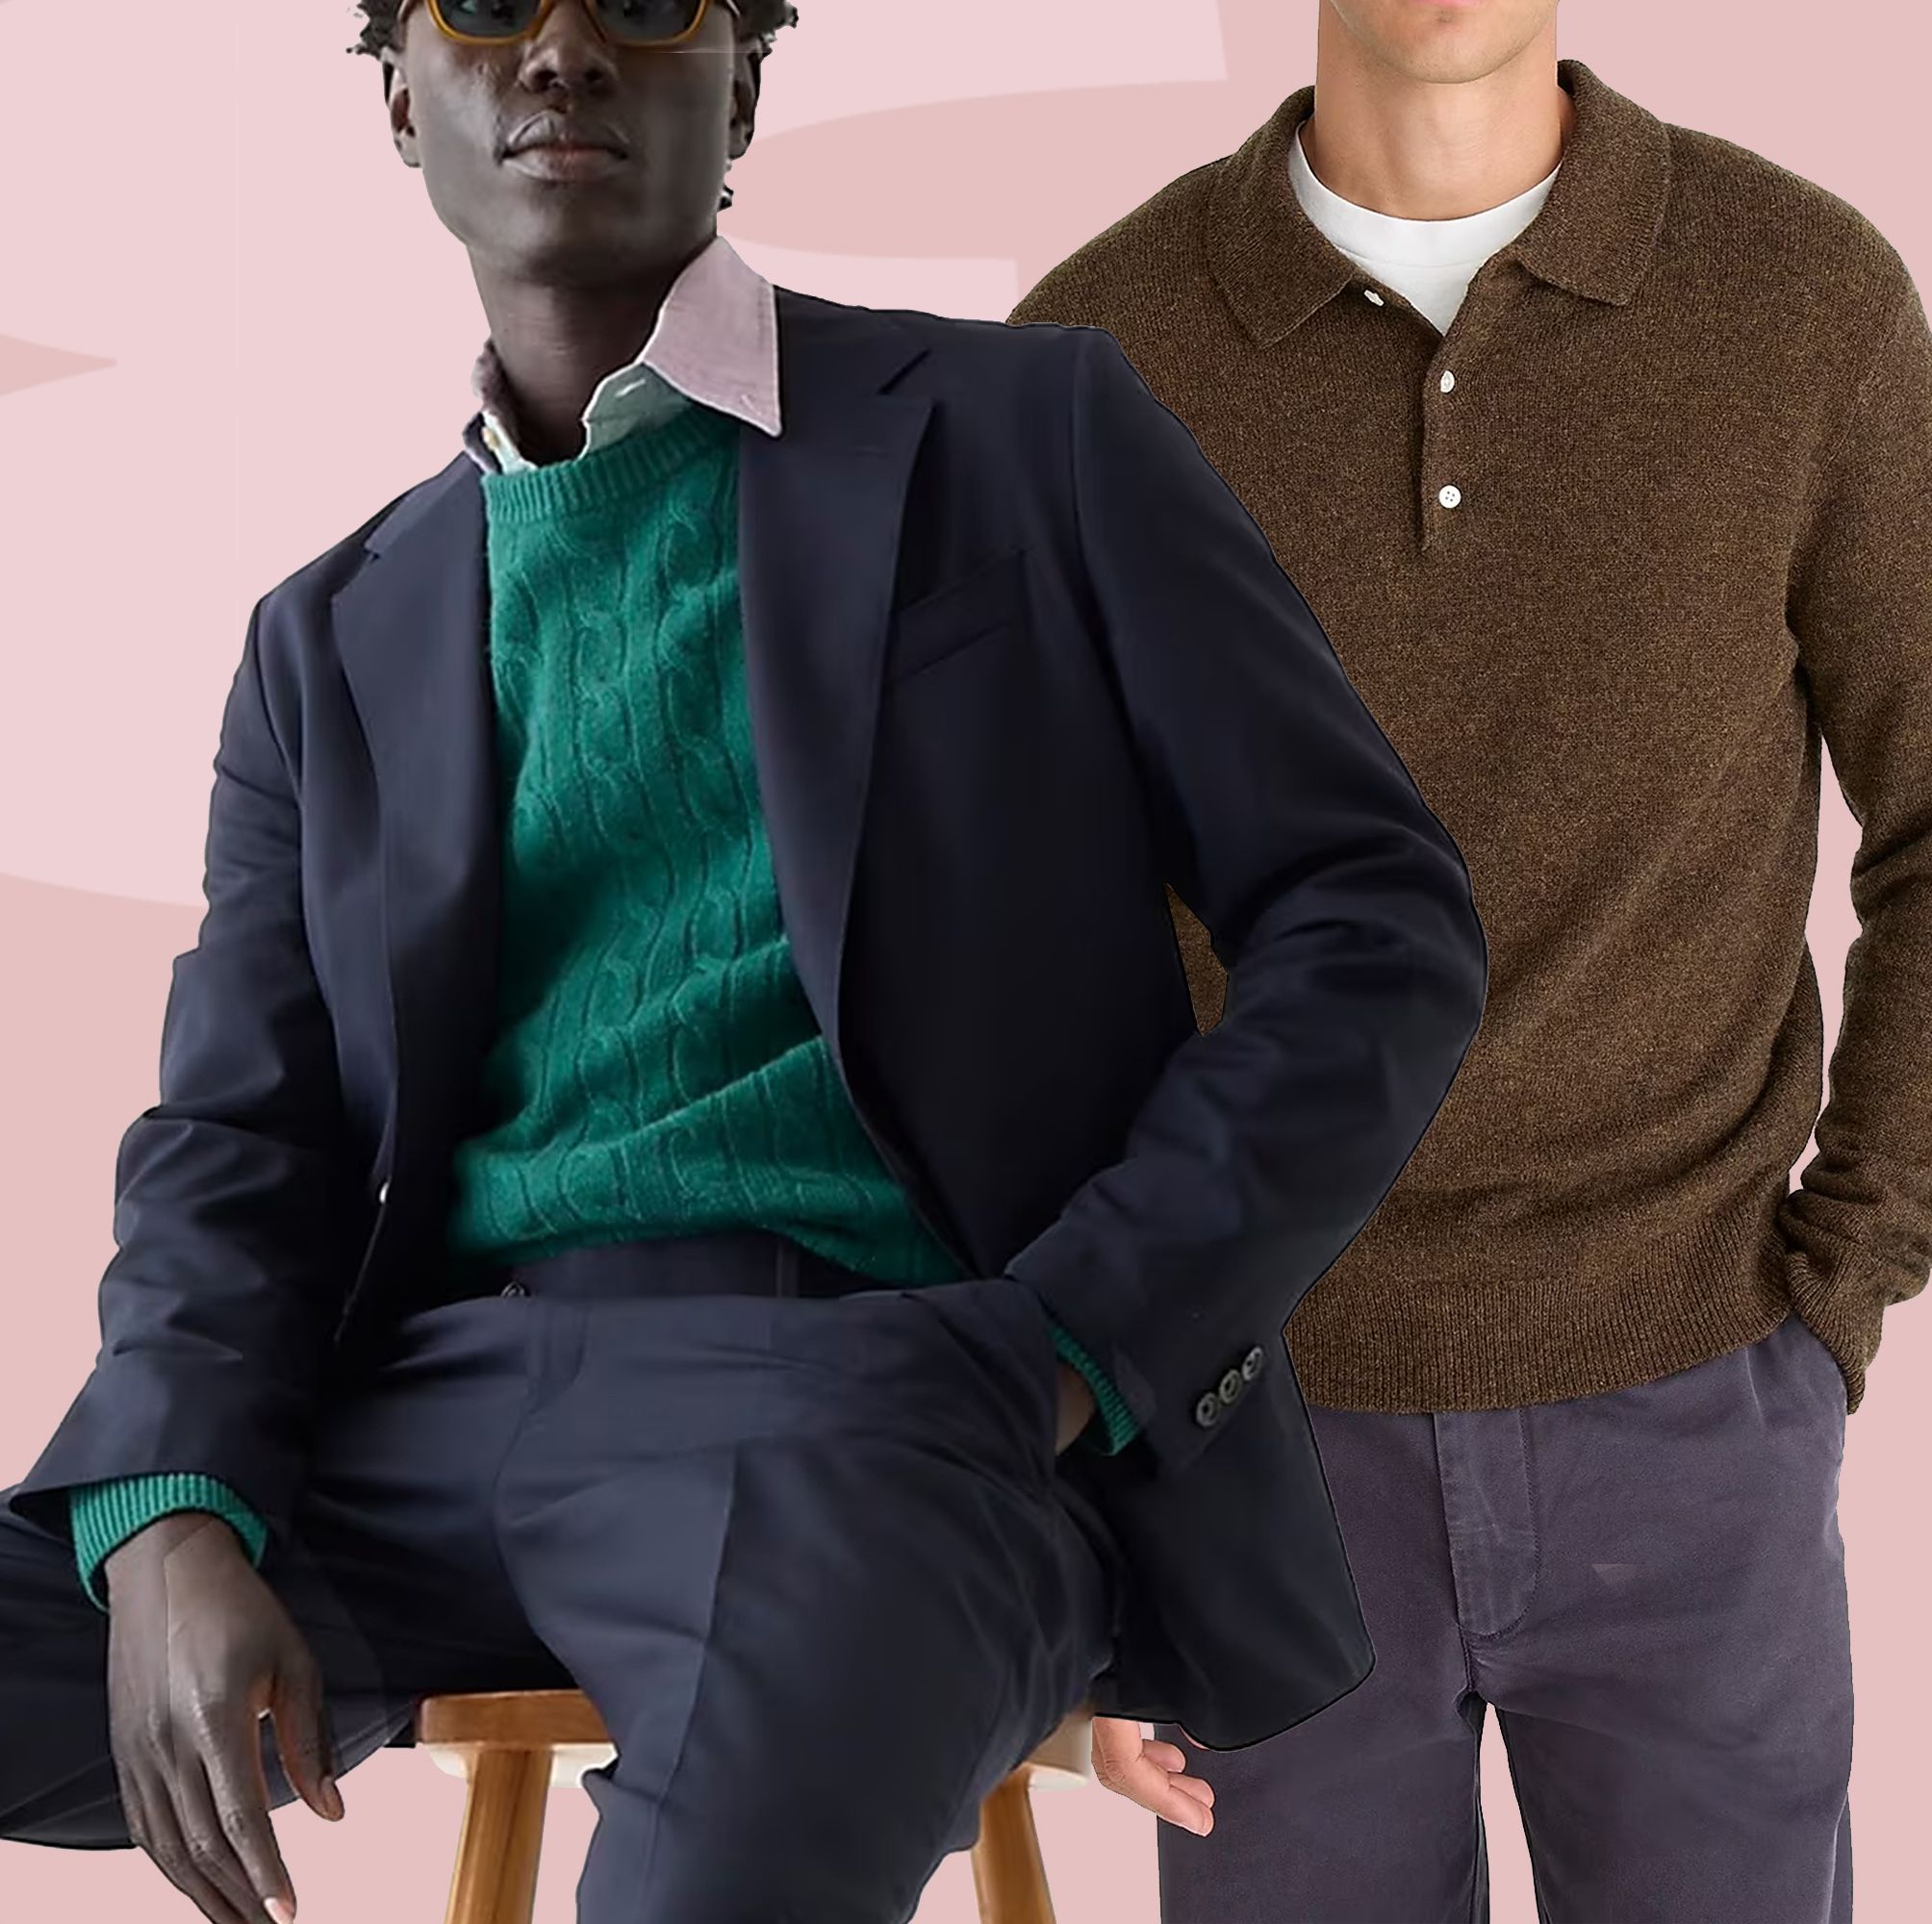 J. Crew's Sale Section Is the Best It's Ever Been